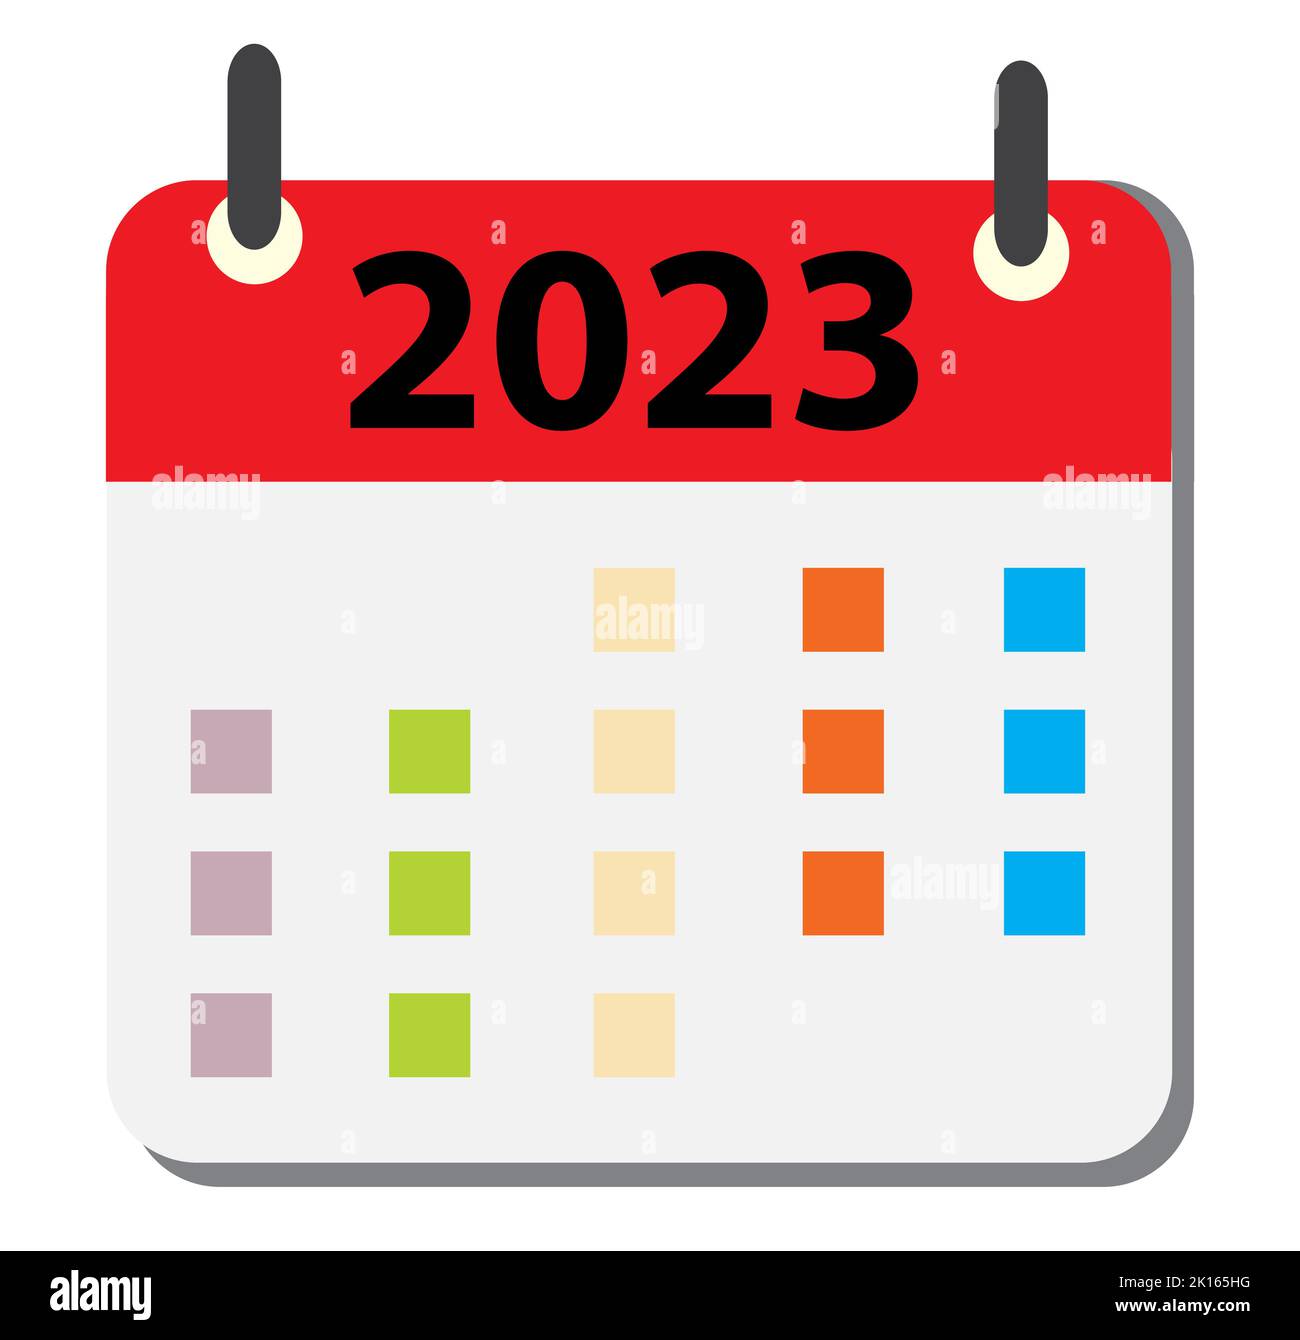 2023 year calendar icon on white background. calendar sign. flat style